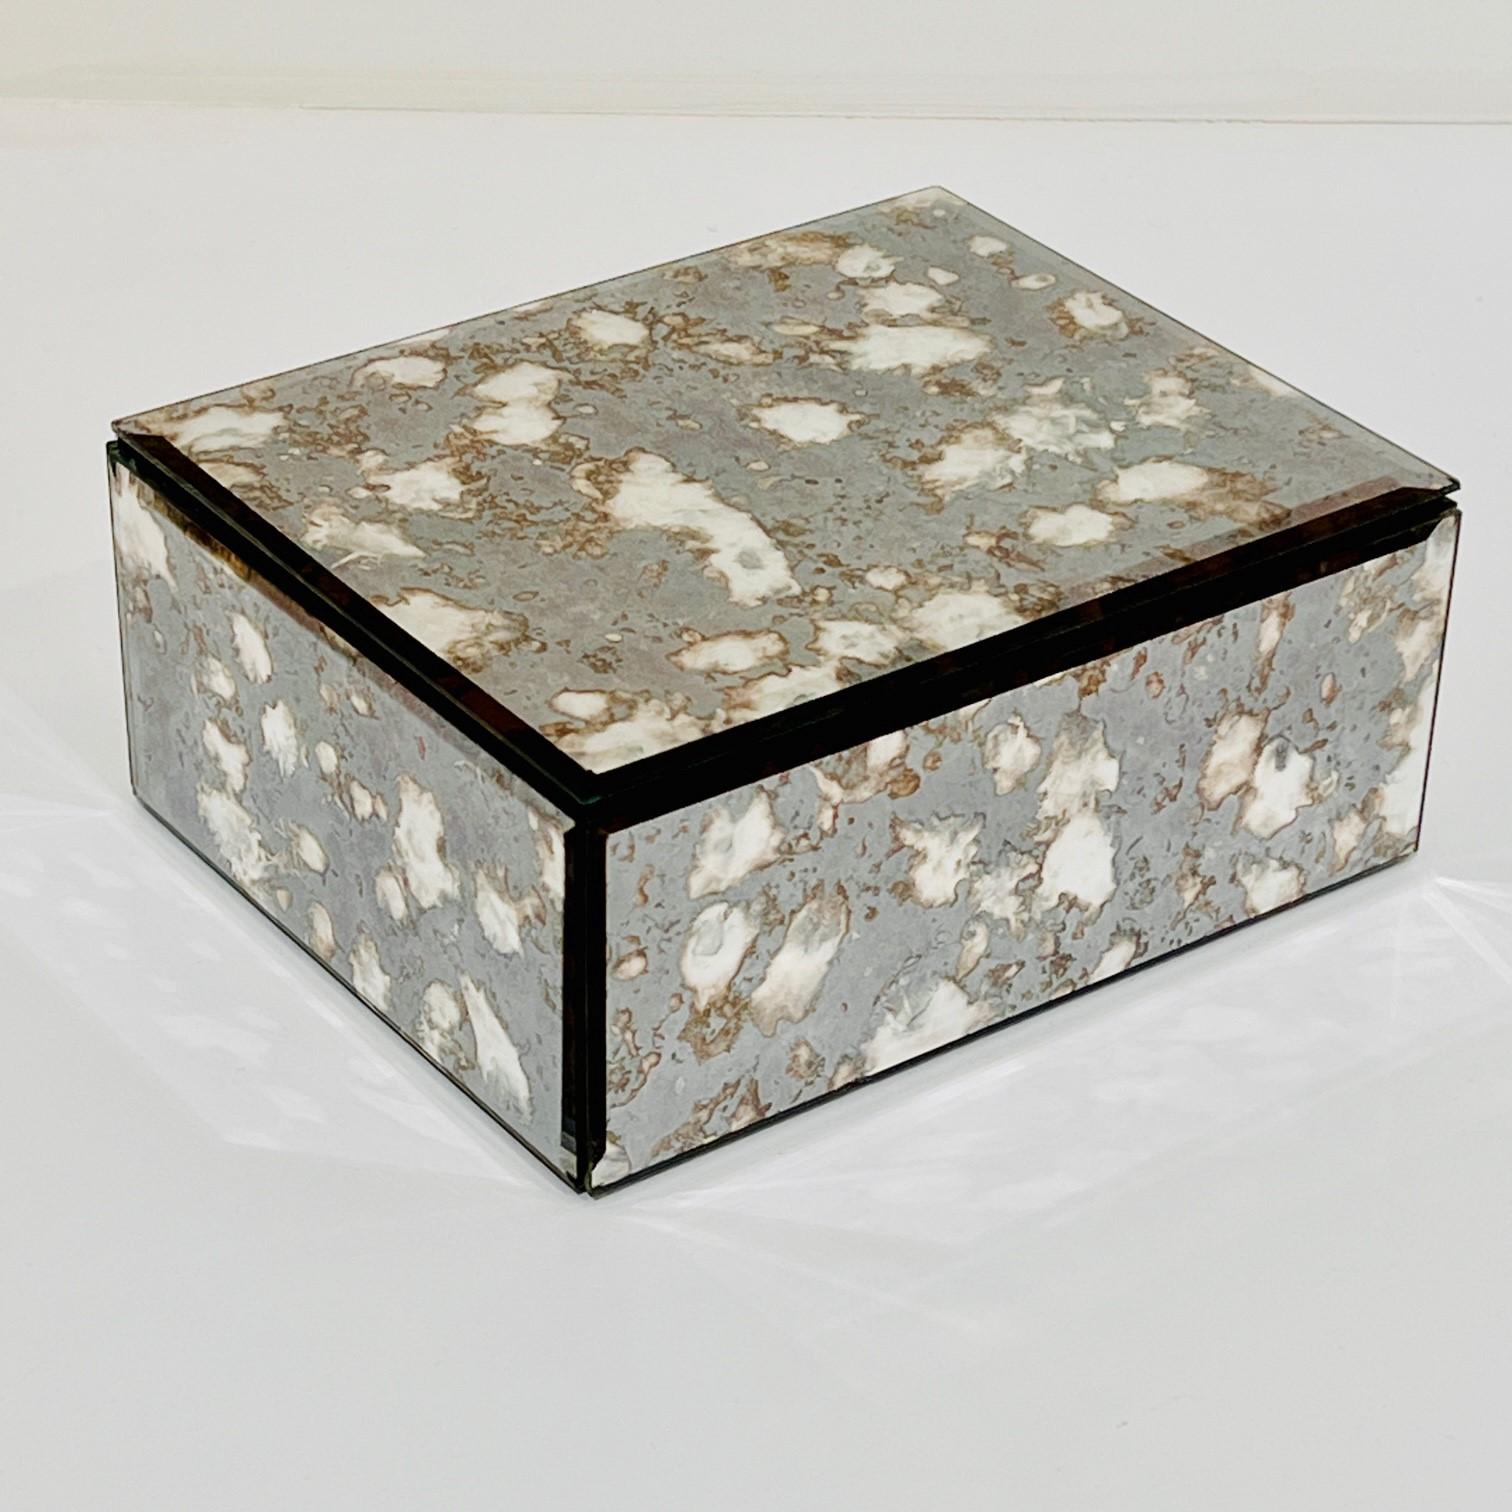 Mirrored Jewelry Box in Antique Grey and Bronze Glass, c. 1980's For Sale 1